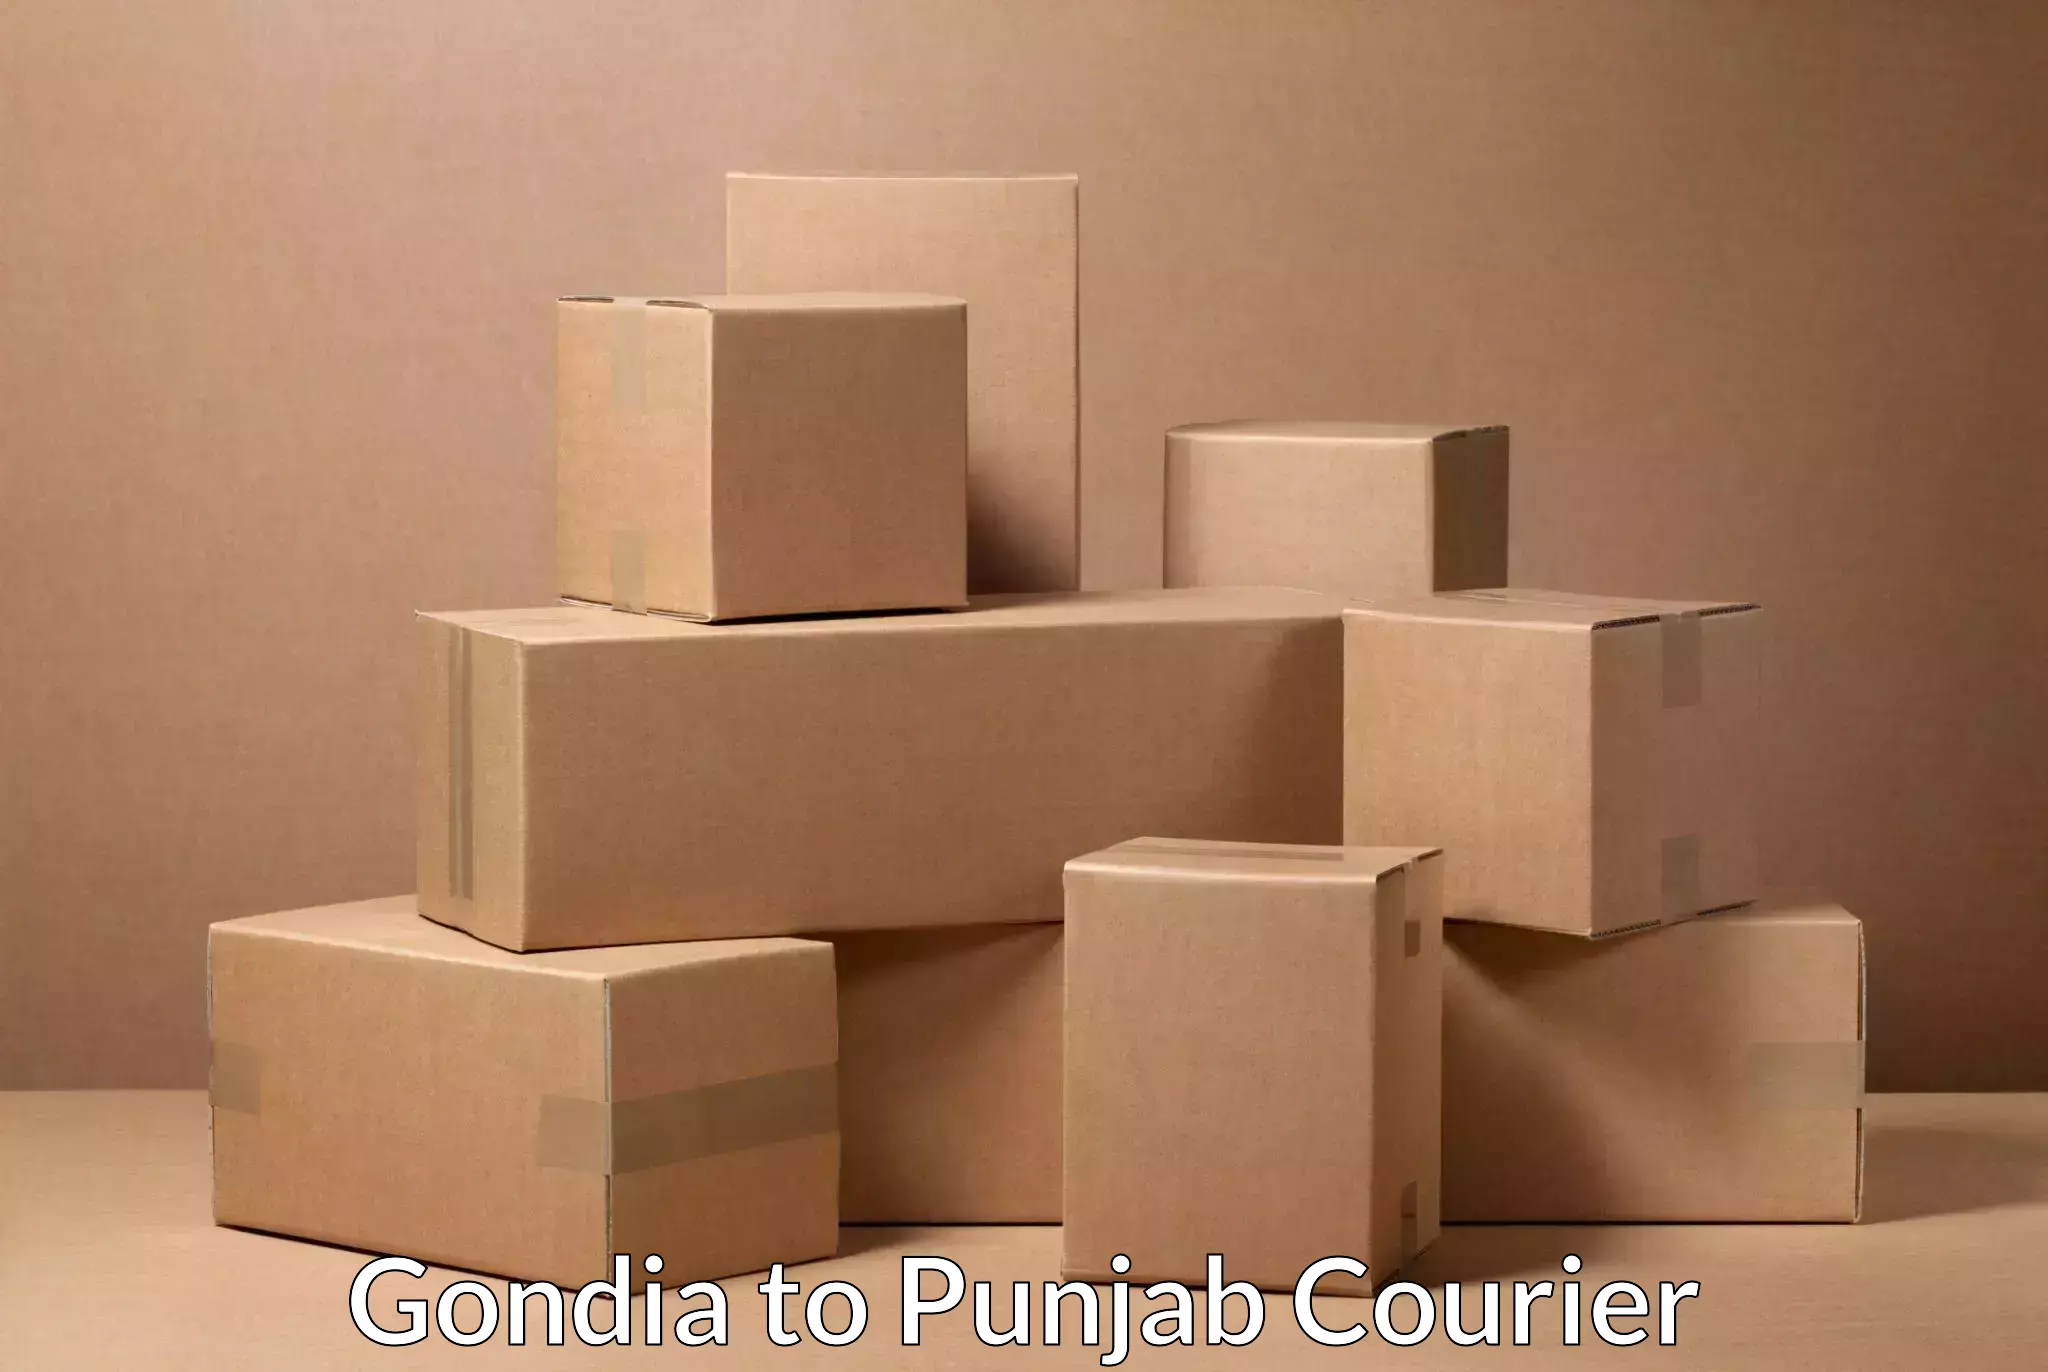 Courier service efficiency in Gondia to Pathankot